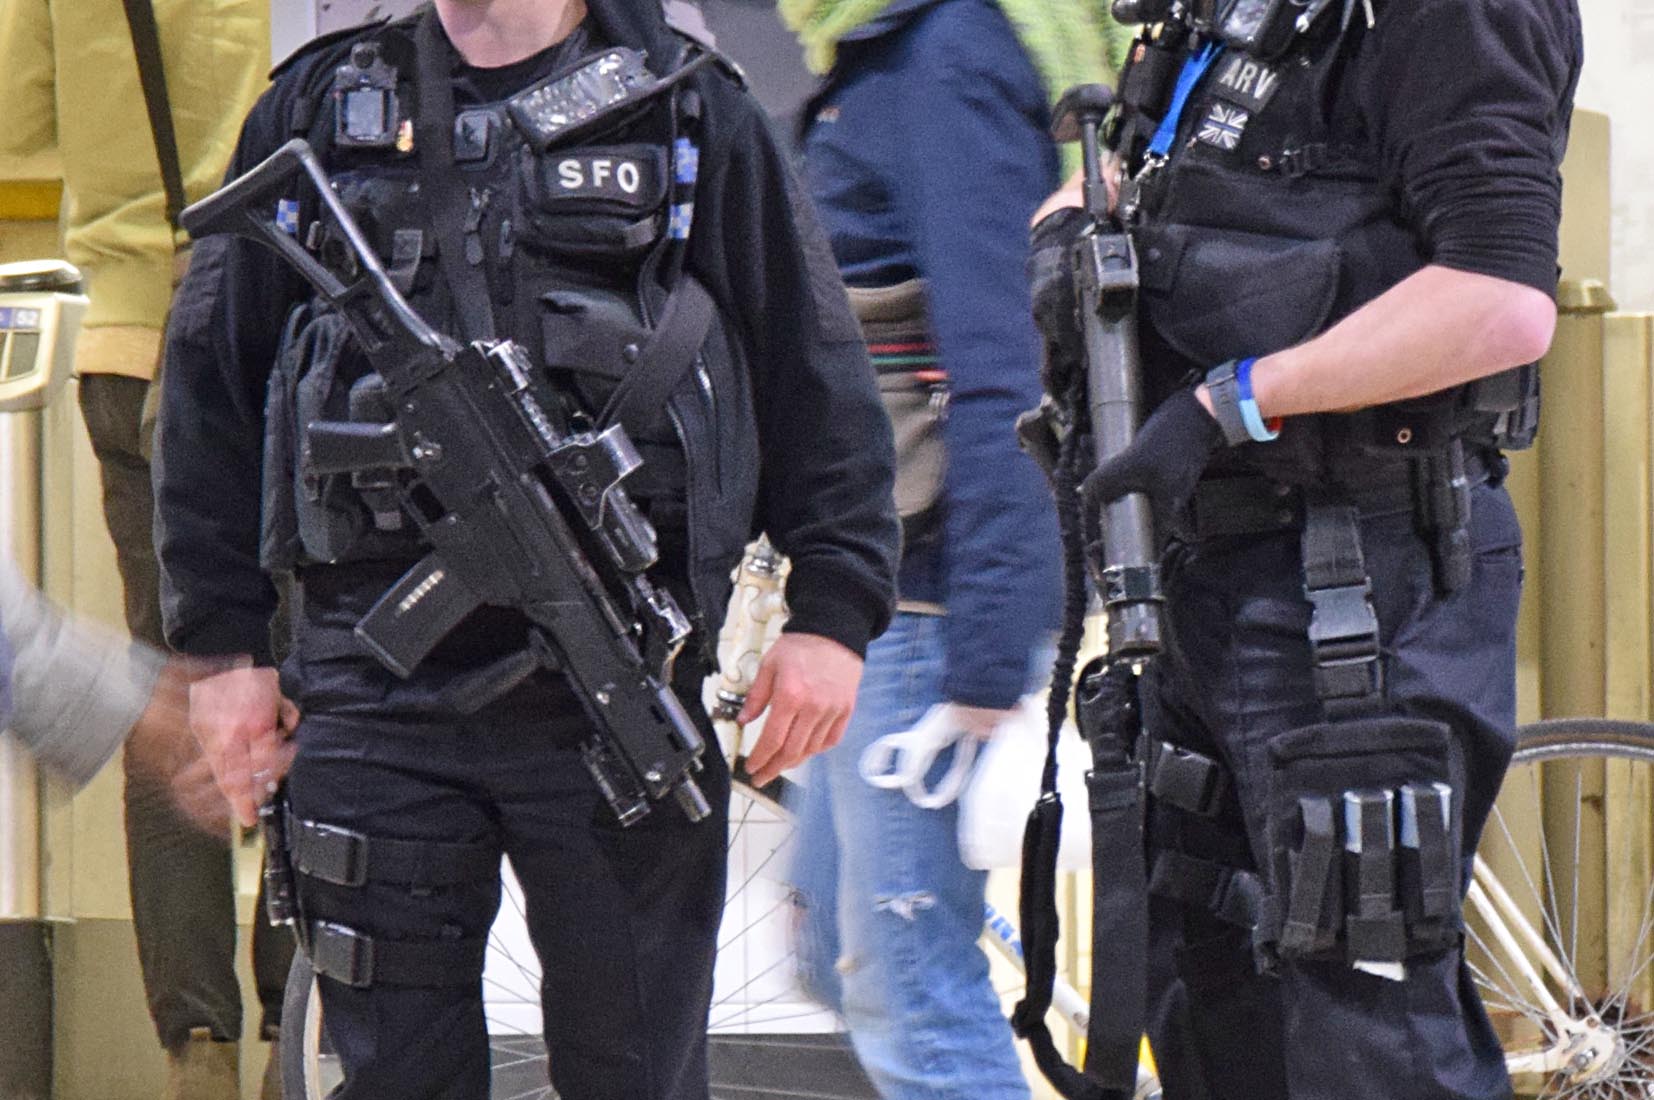 Armed Police Officers swoop Watford junction Train Station for Suspect